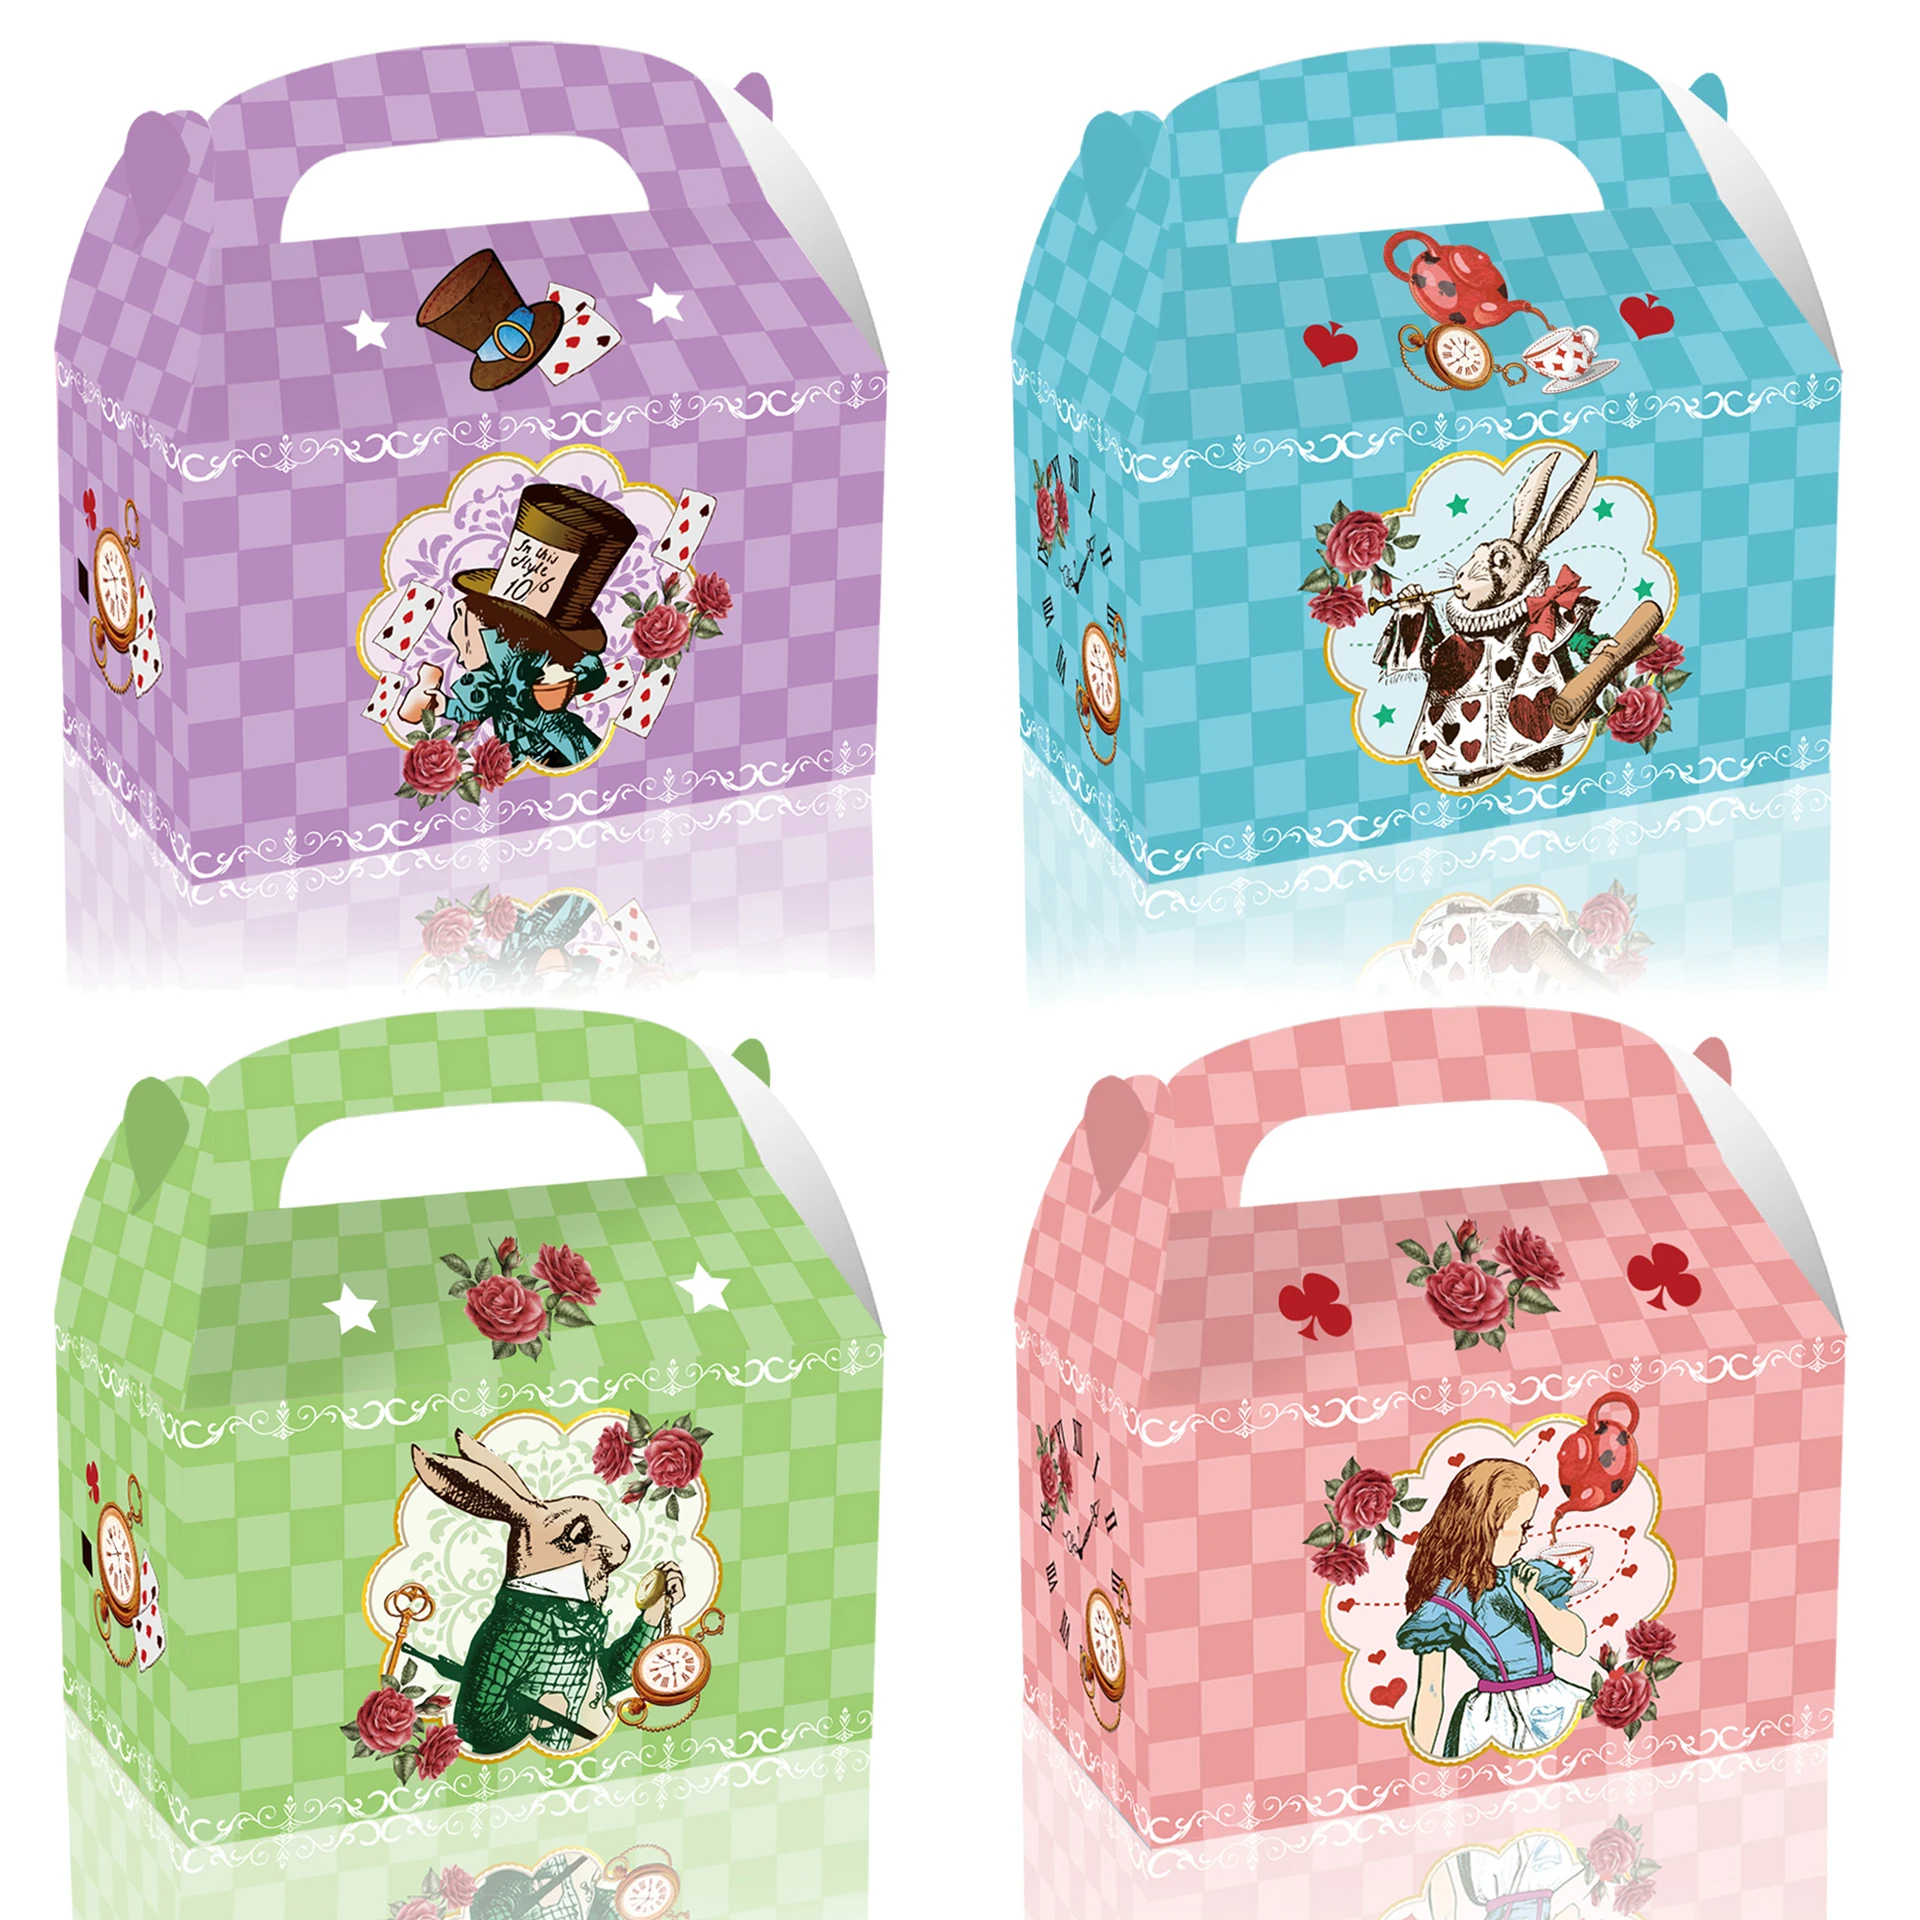 

Disney Alice in Wonderland Candy Portable Box Theme Birthday Party Cookies Fruit Popcorn Decoration Baby Shower Kid Girl Gift